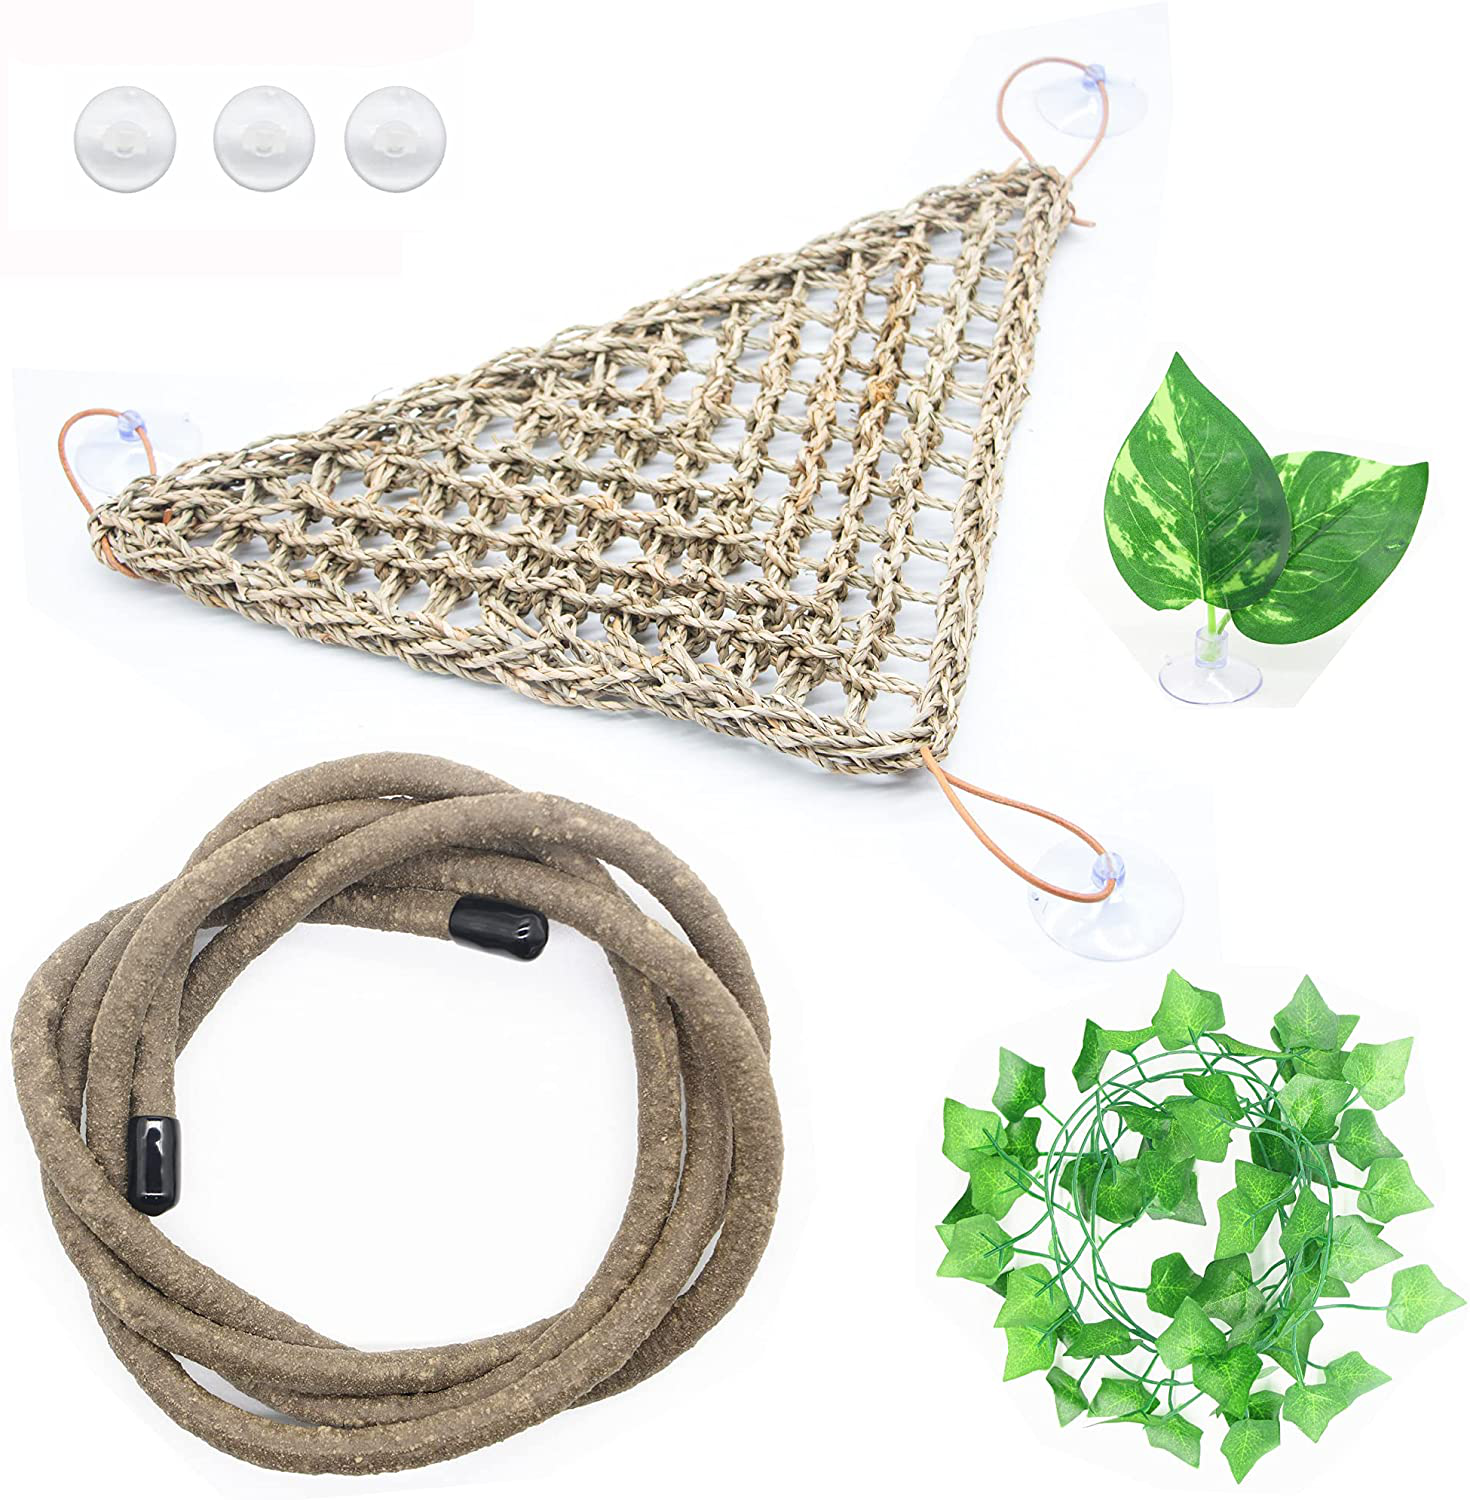 Duspro 10FT Reptile Vines for Climbing Bendable Branch for Reptile Natural  Moss Rope Jungle Decor for Bearded Dragon, Chameleon Tank Accessories